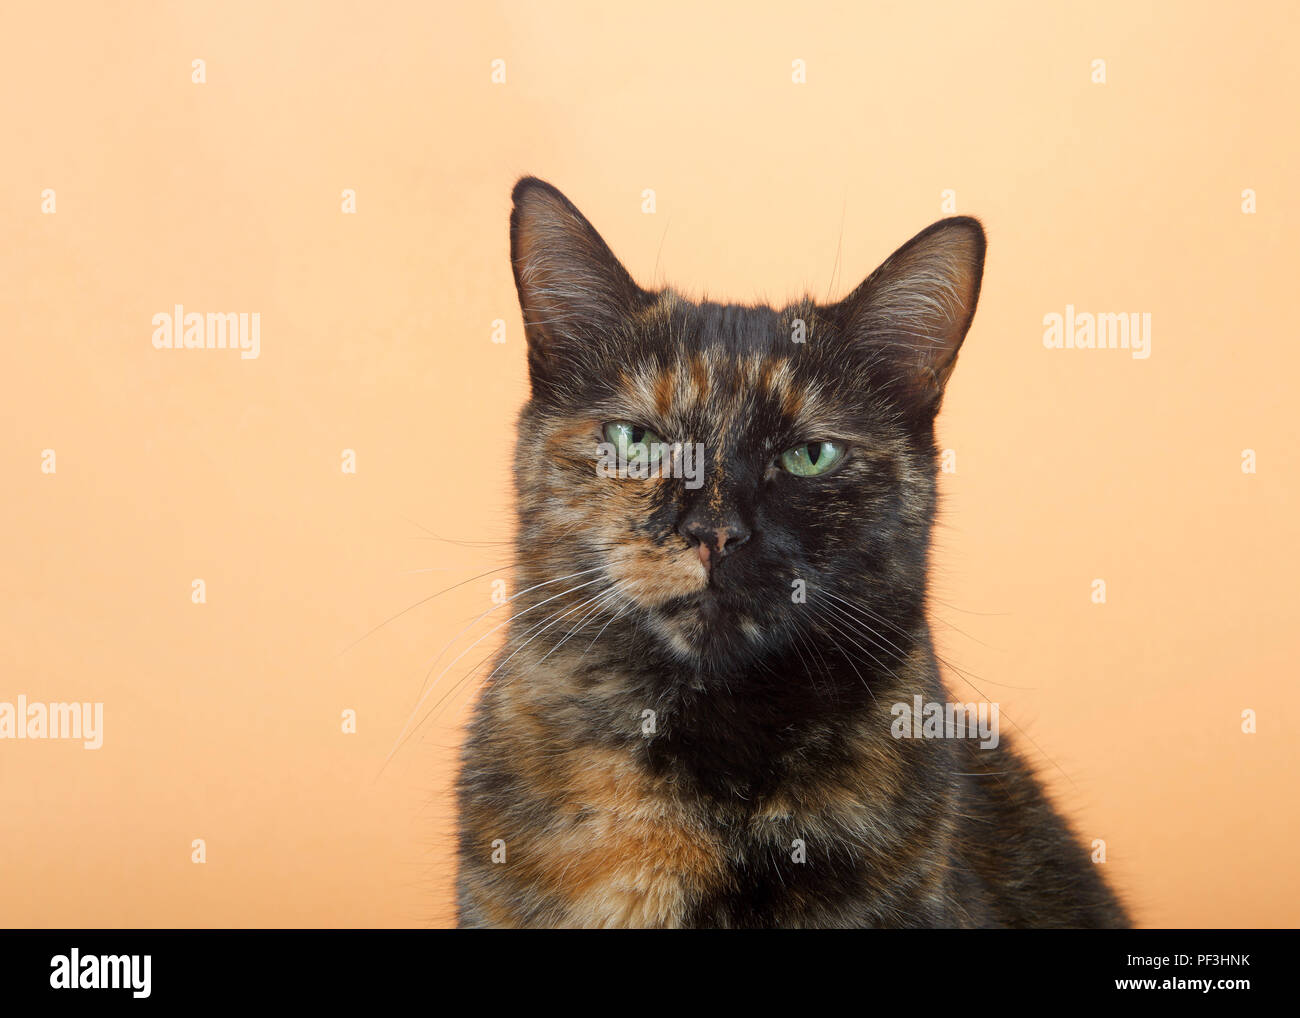 Portrait of one tortie torbie tabby cat on an orange background. Looking directly at viewer with perplexed irritated expression. Copy space. Stock Photo